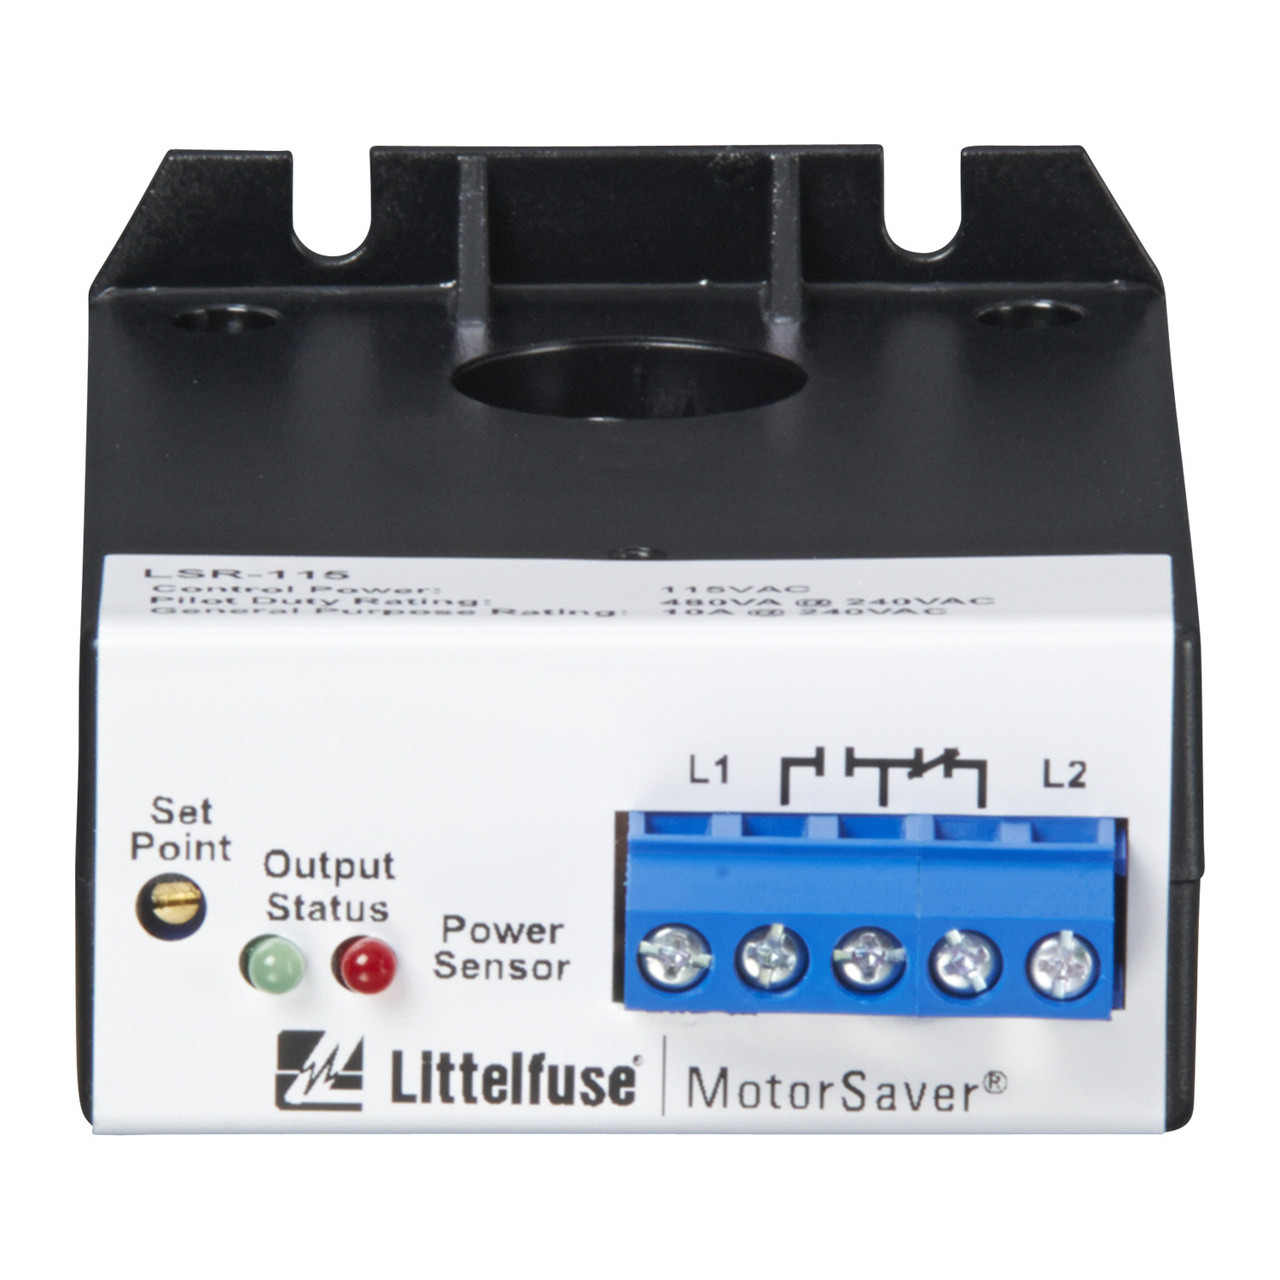 Littelfuse-Symcom LSR-24 Current Monitor Relays